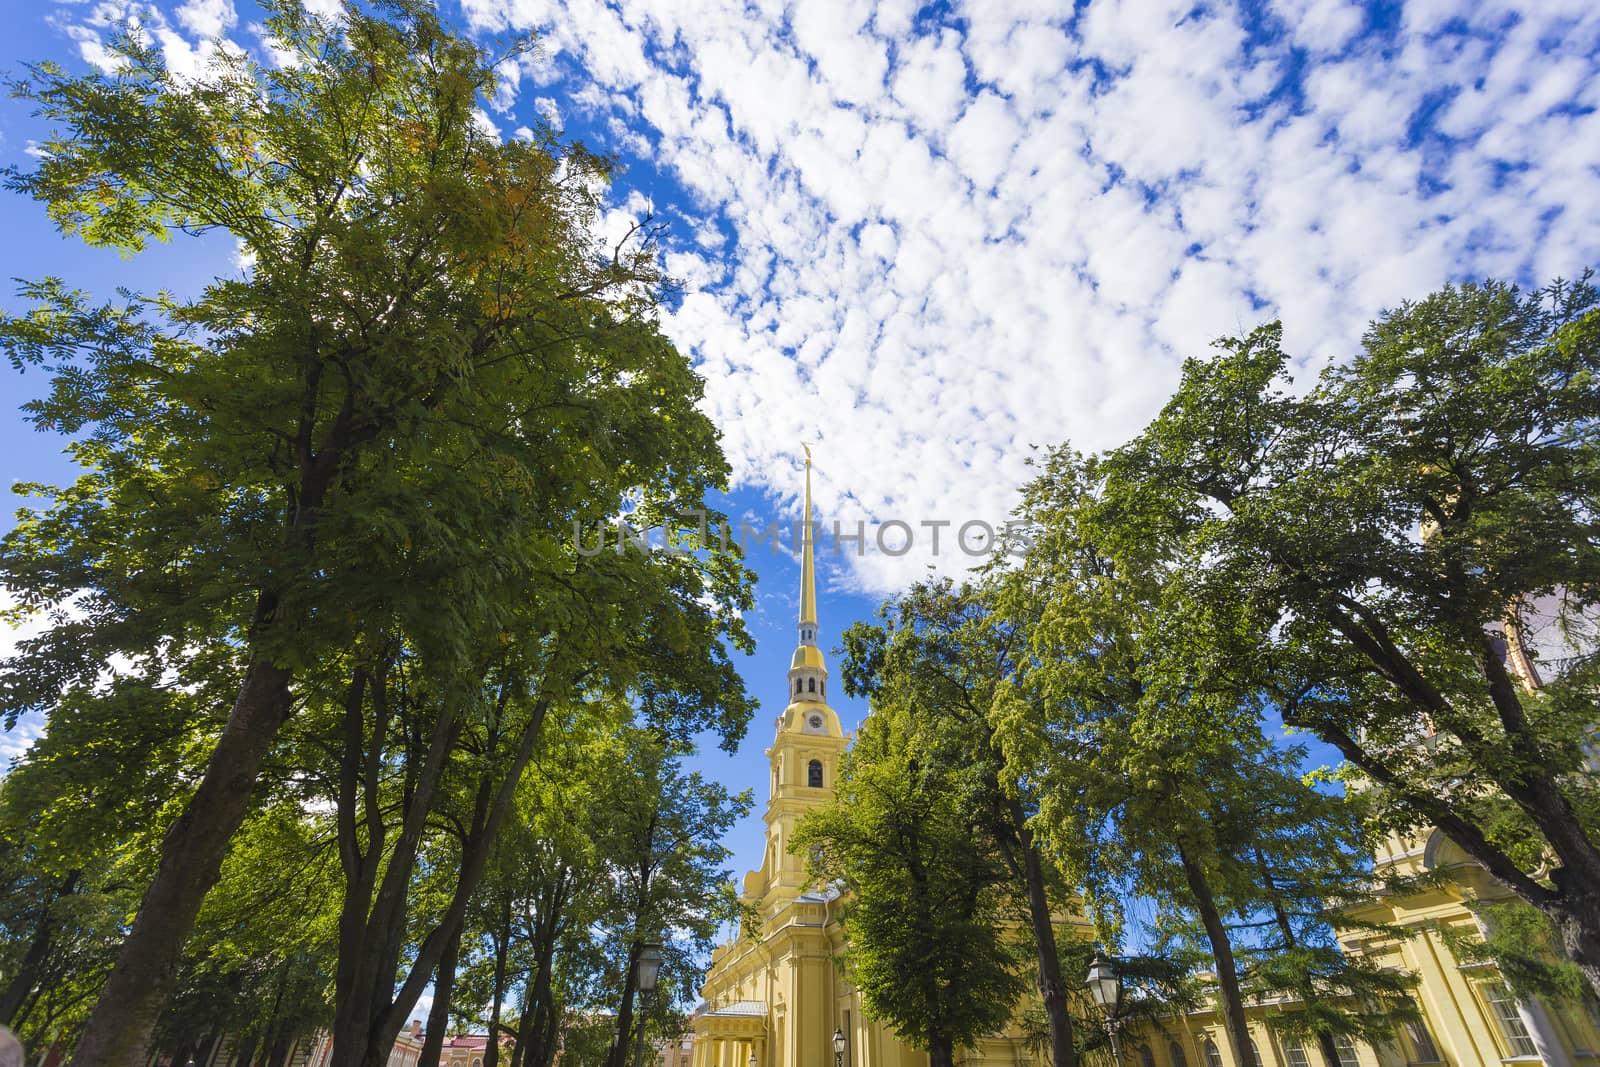 The Peter and Paul cathedral in Peter and Paul fortress.St. Pete by truphoto